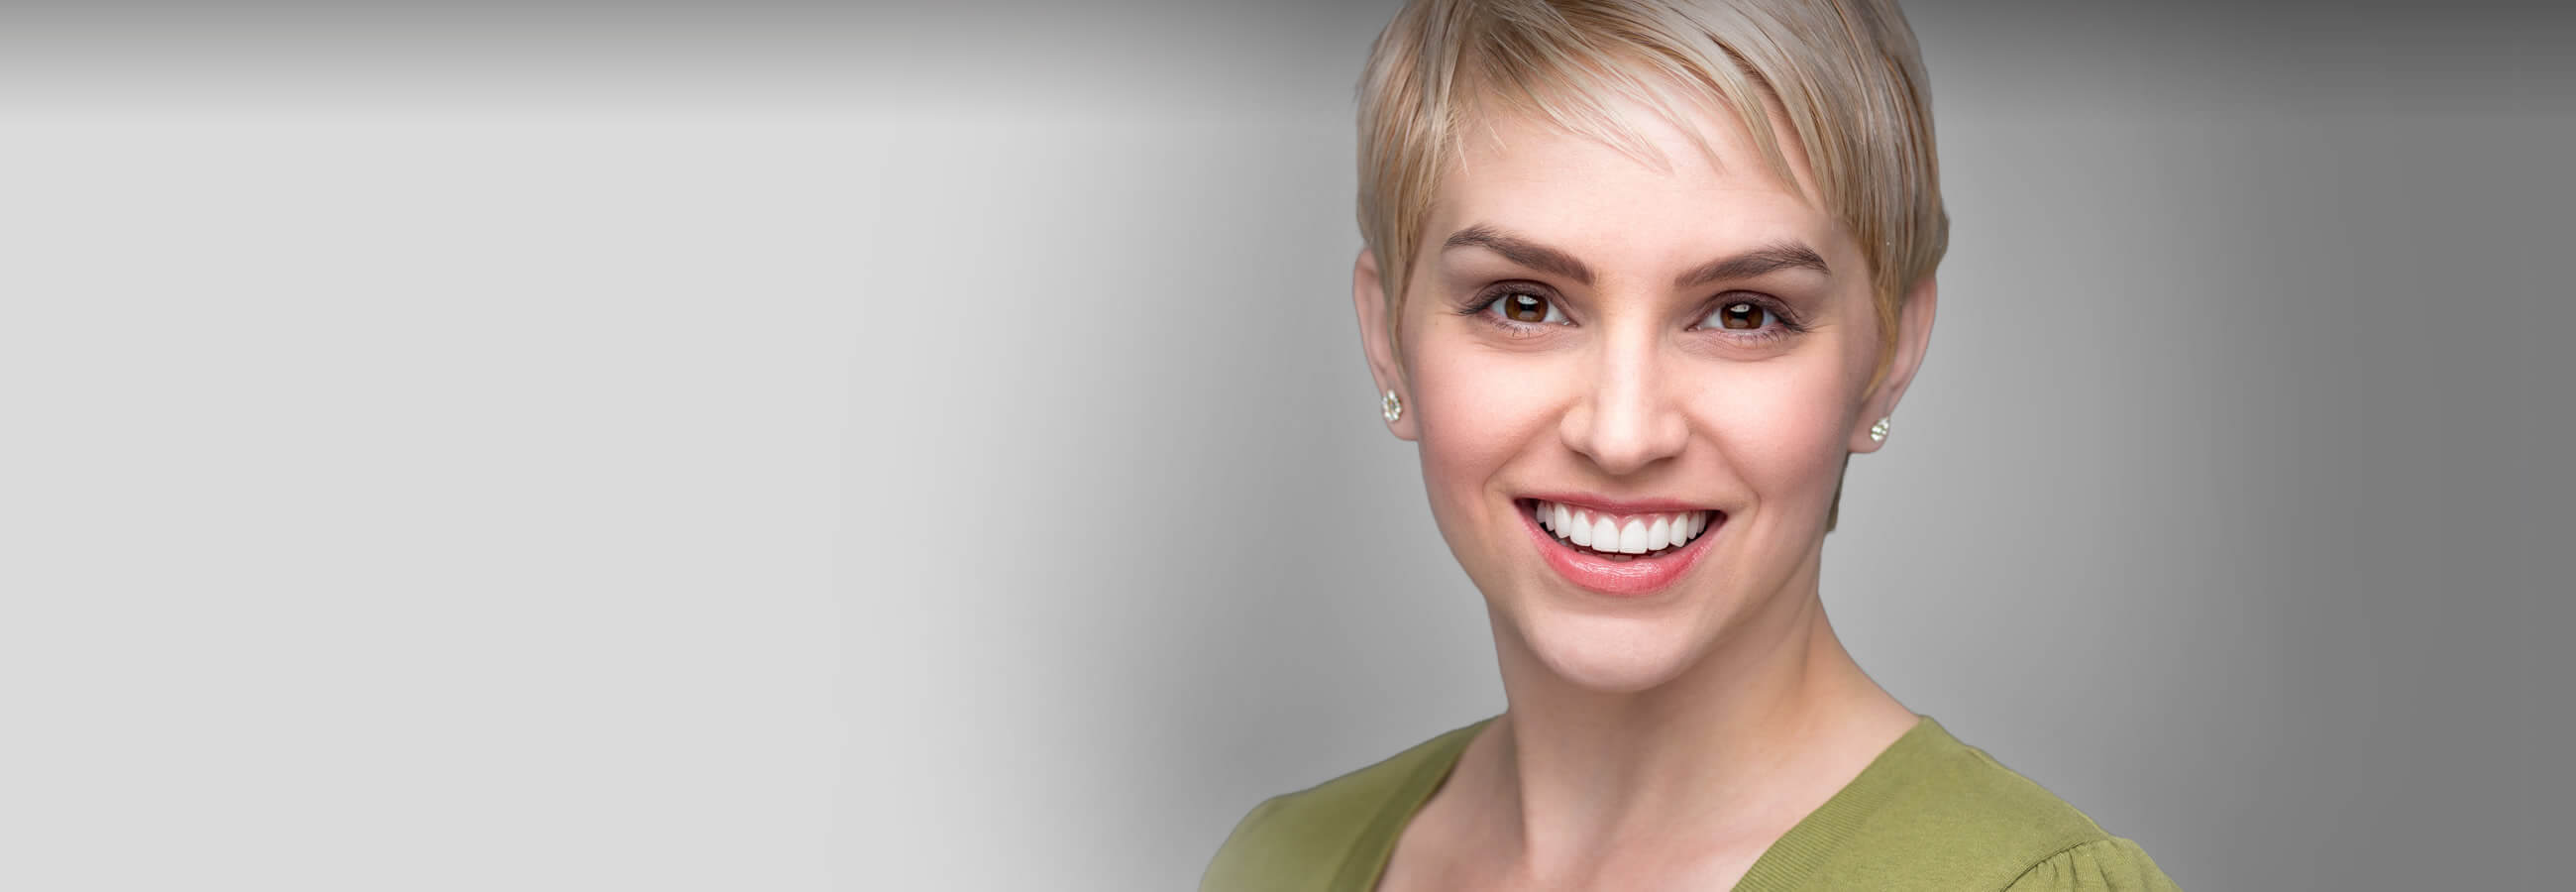 Treatment for Facial Lines & Wrinkles at Premier Dental Care in Bloxwich, Walsall